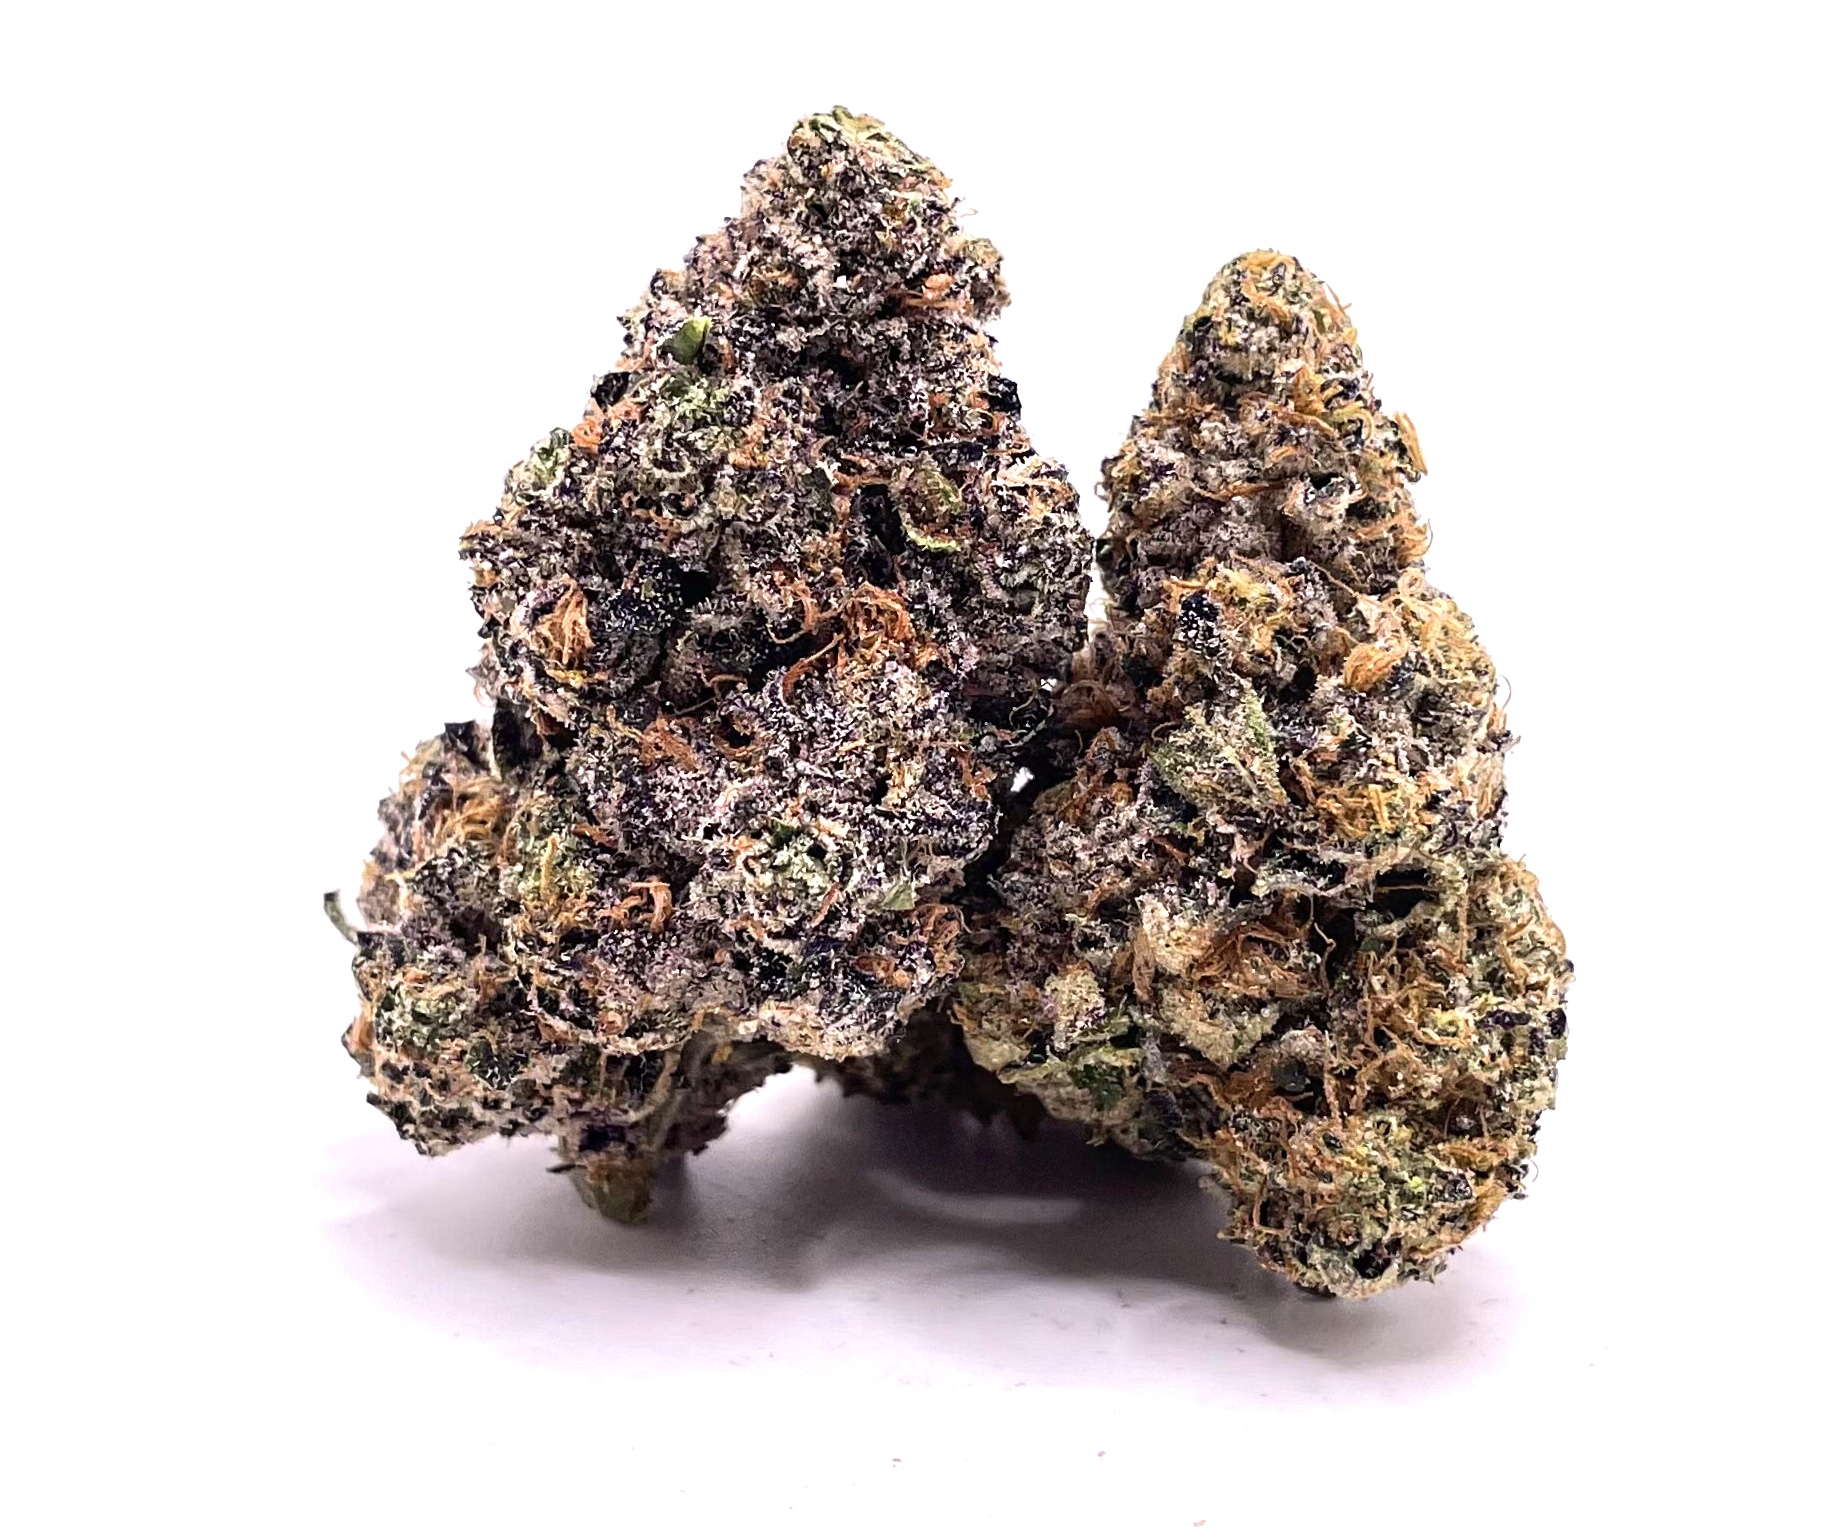 Red Viper x Sherbanger – 4gs for $40 *Top Shelf $180 OZ Special*